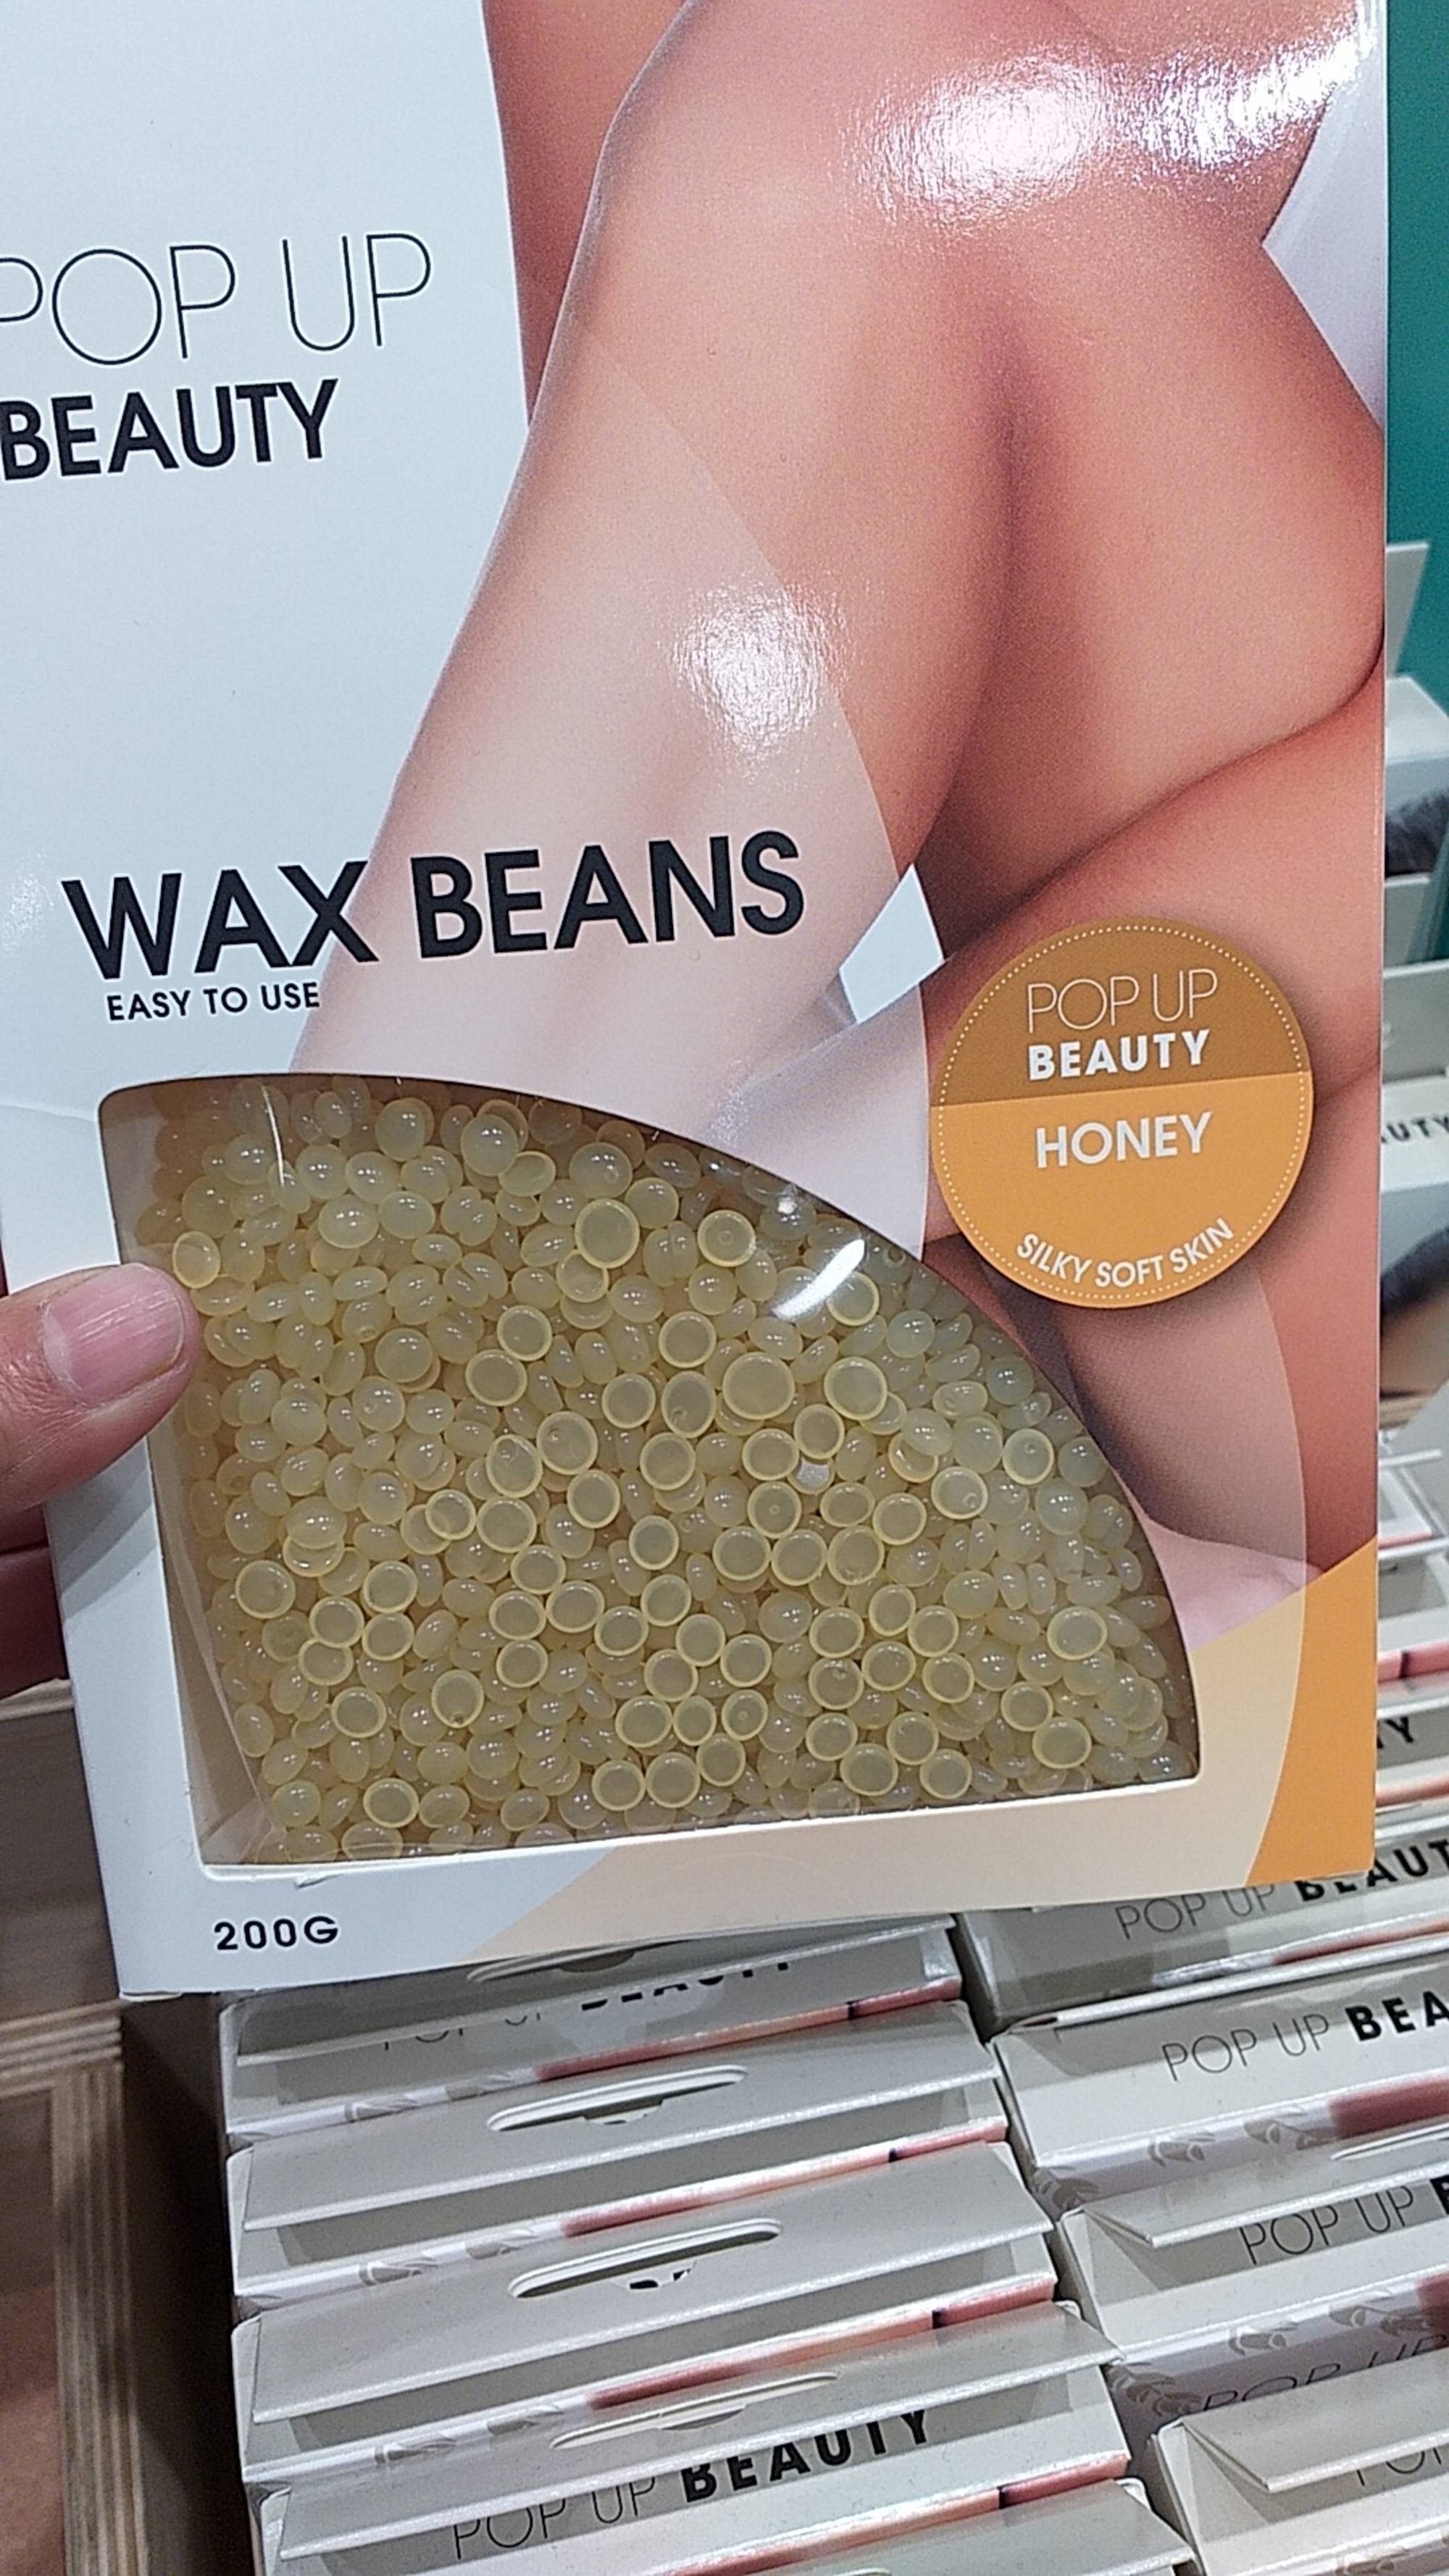 POP UP BEAUTY - Wax beans easy to use 